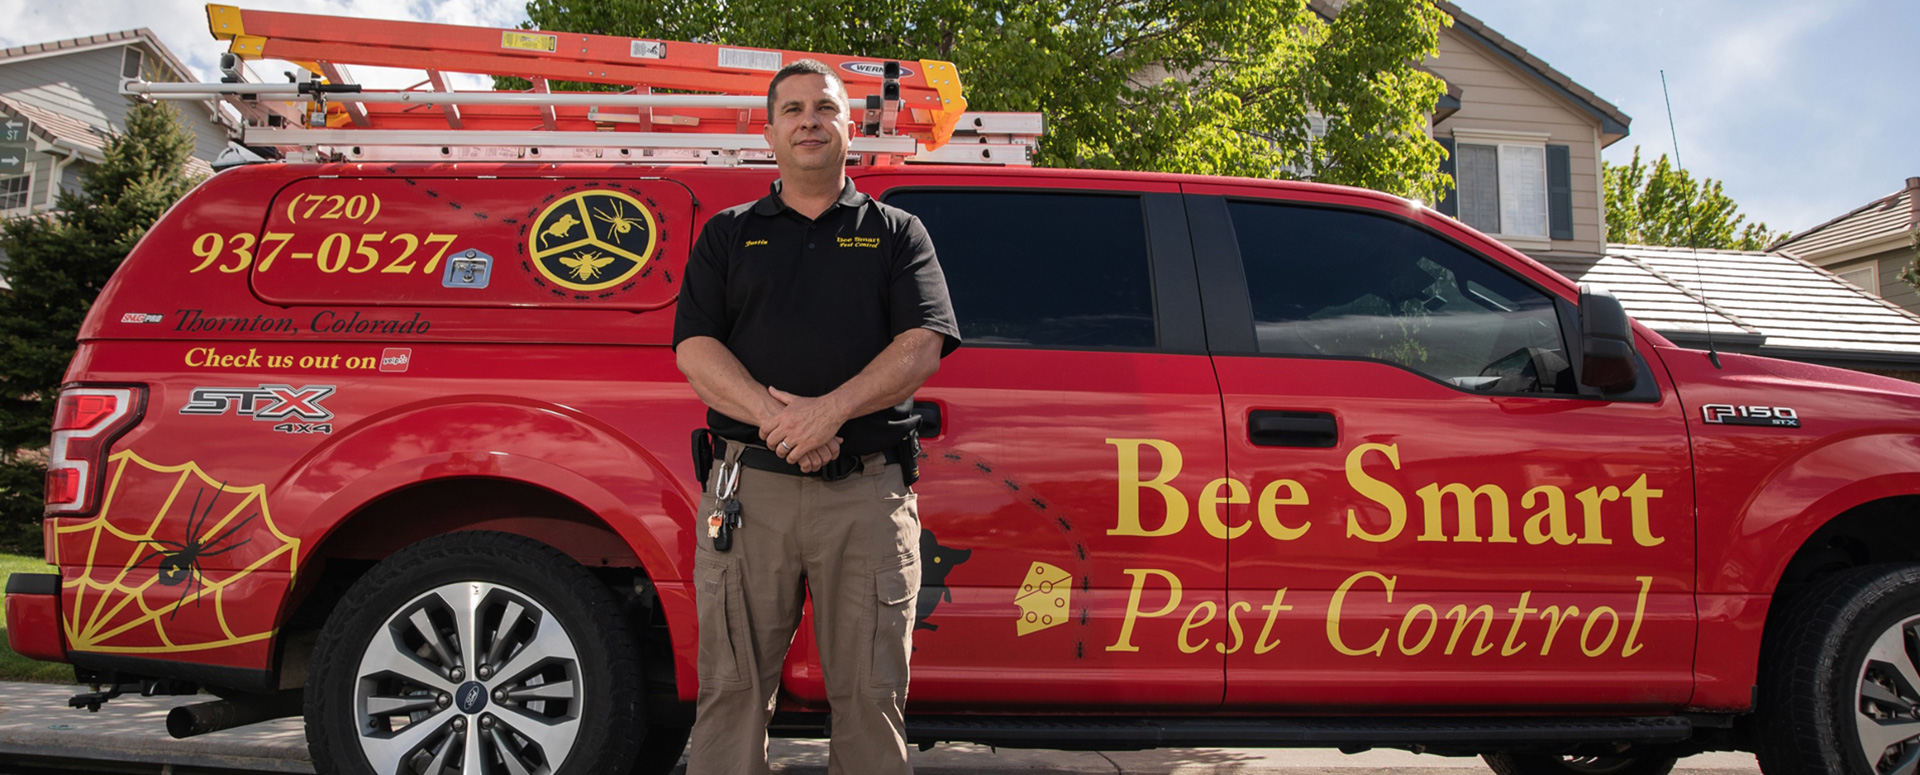 Justin Kehoe with Bee Smart Pest Control